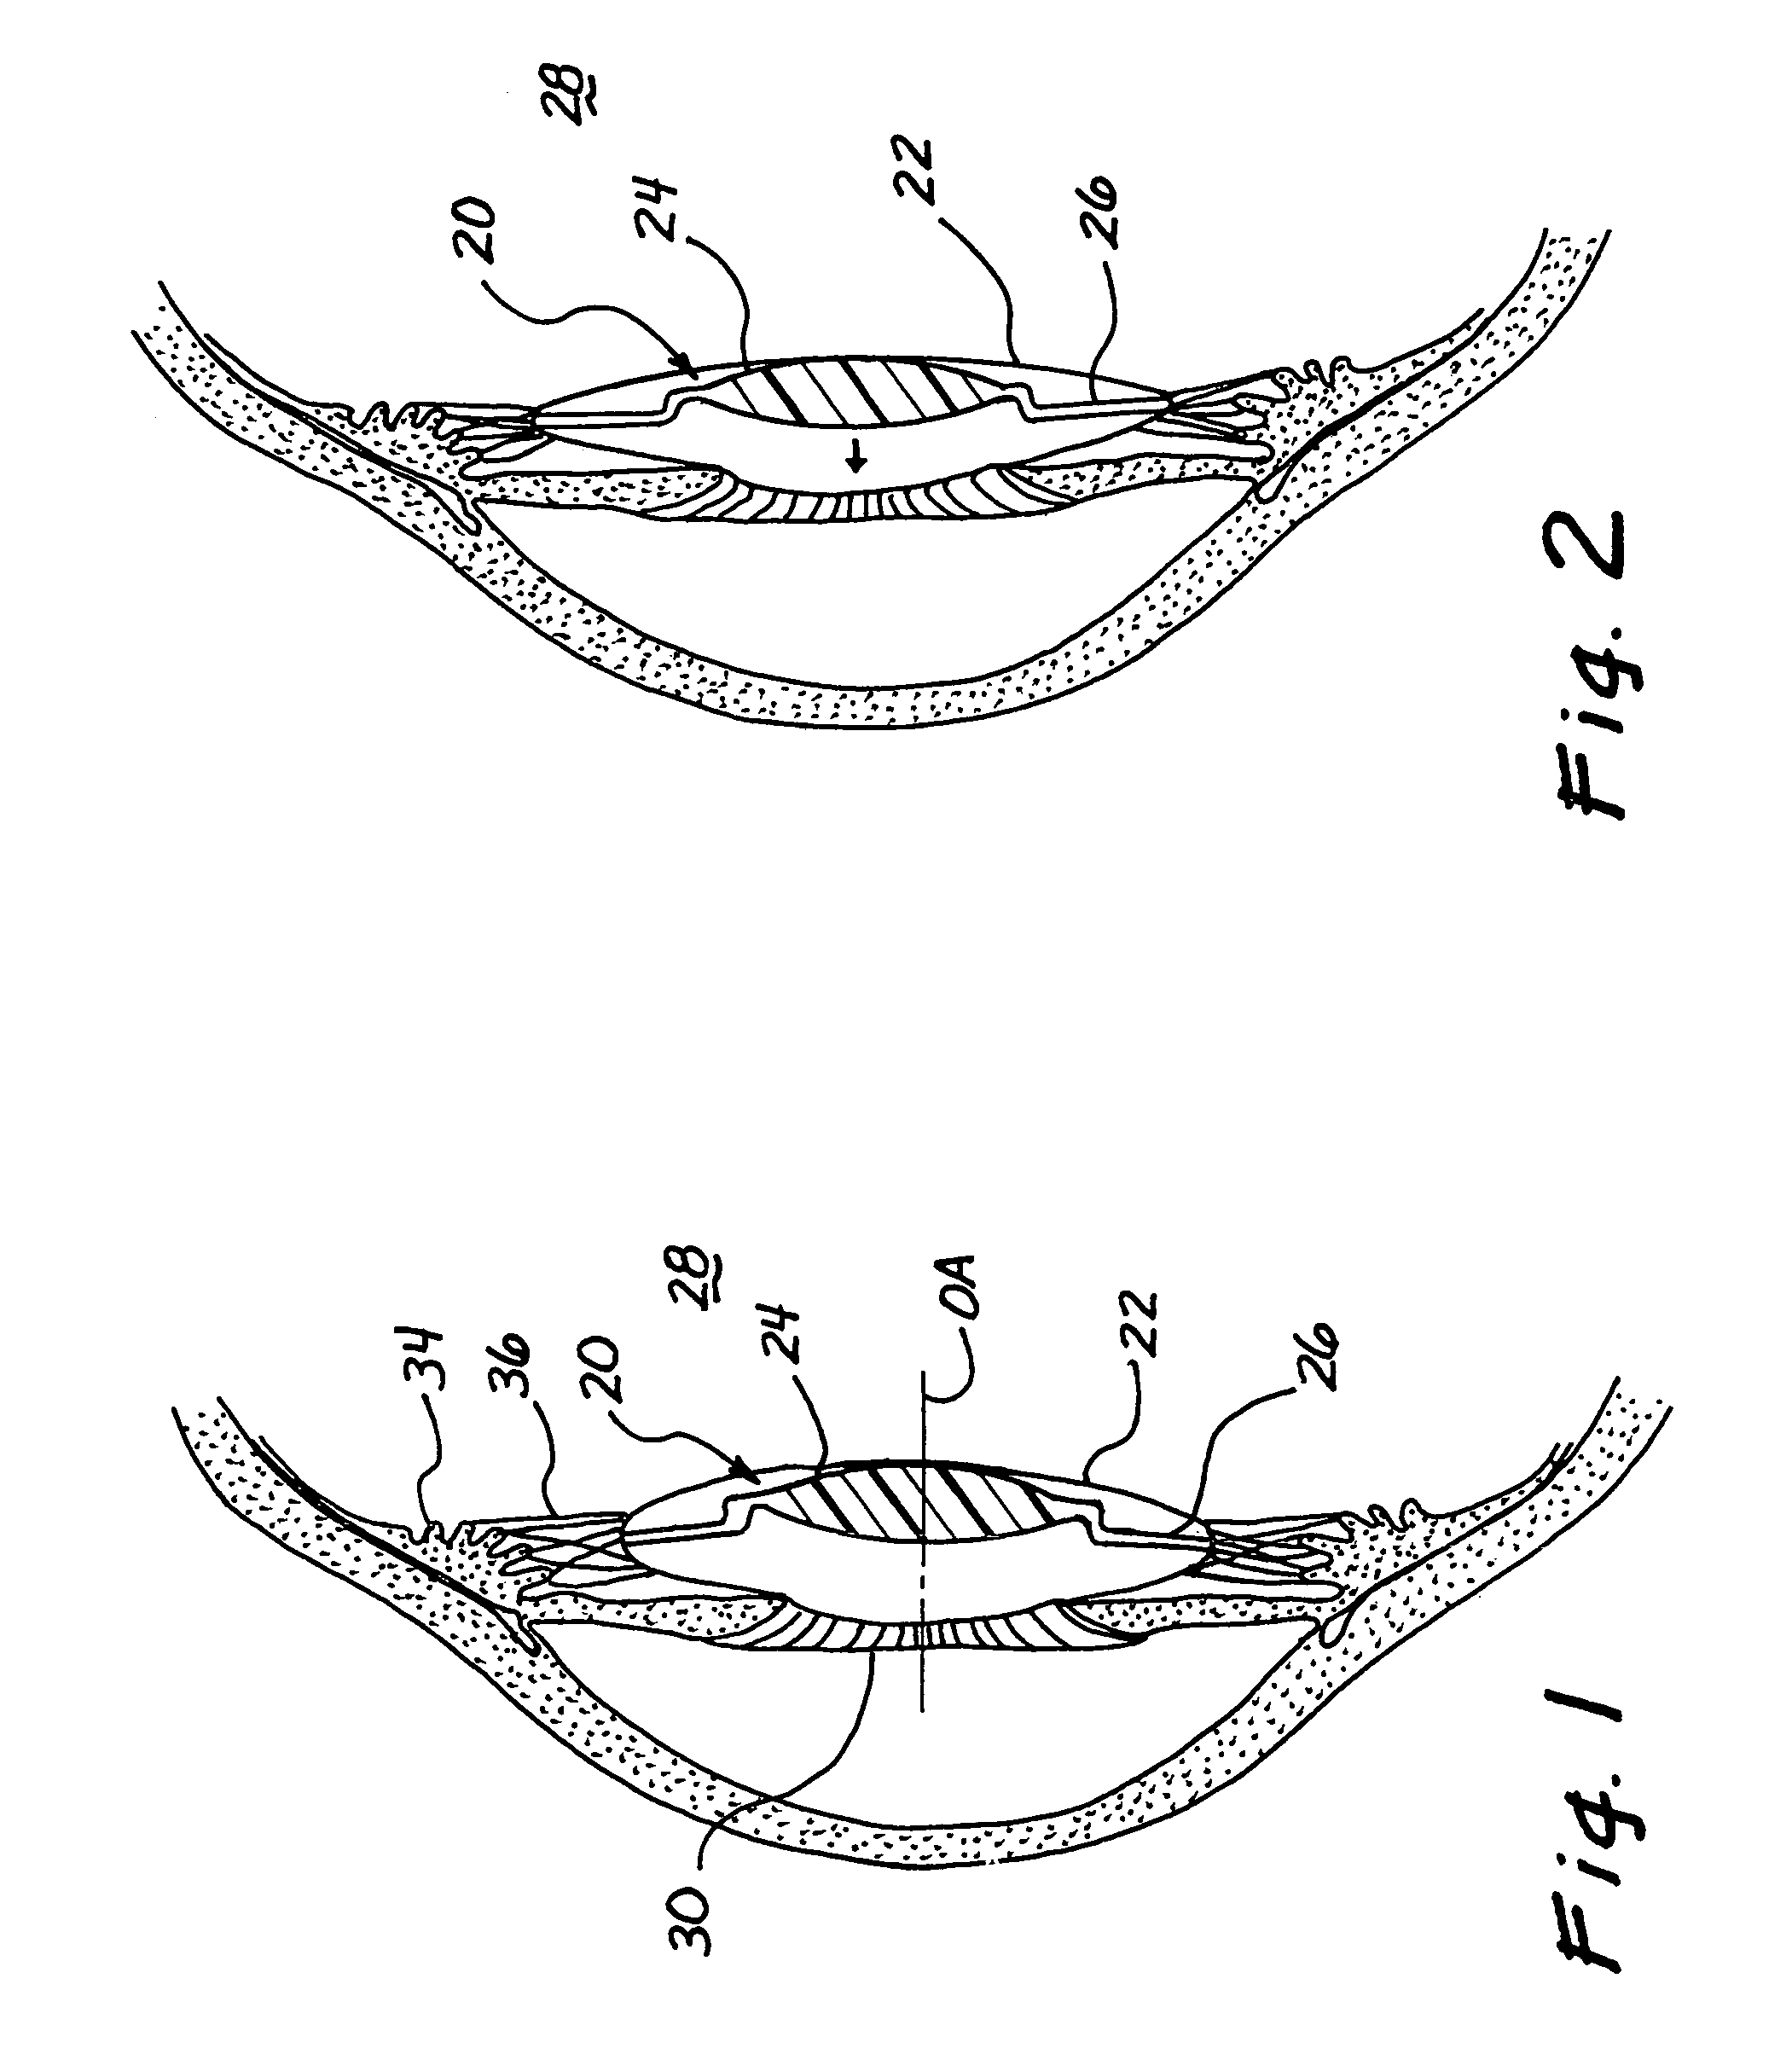 Accommodating intraocular lens with elongated suspension structure